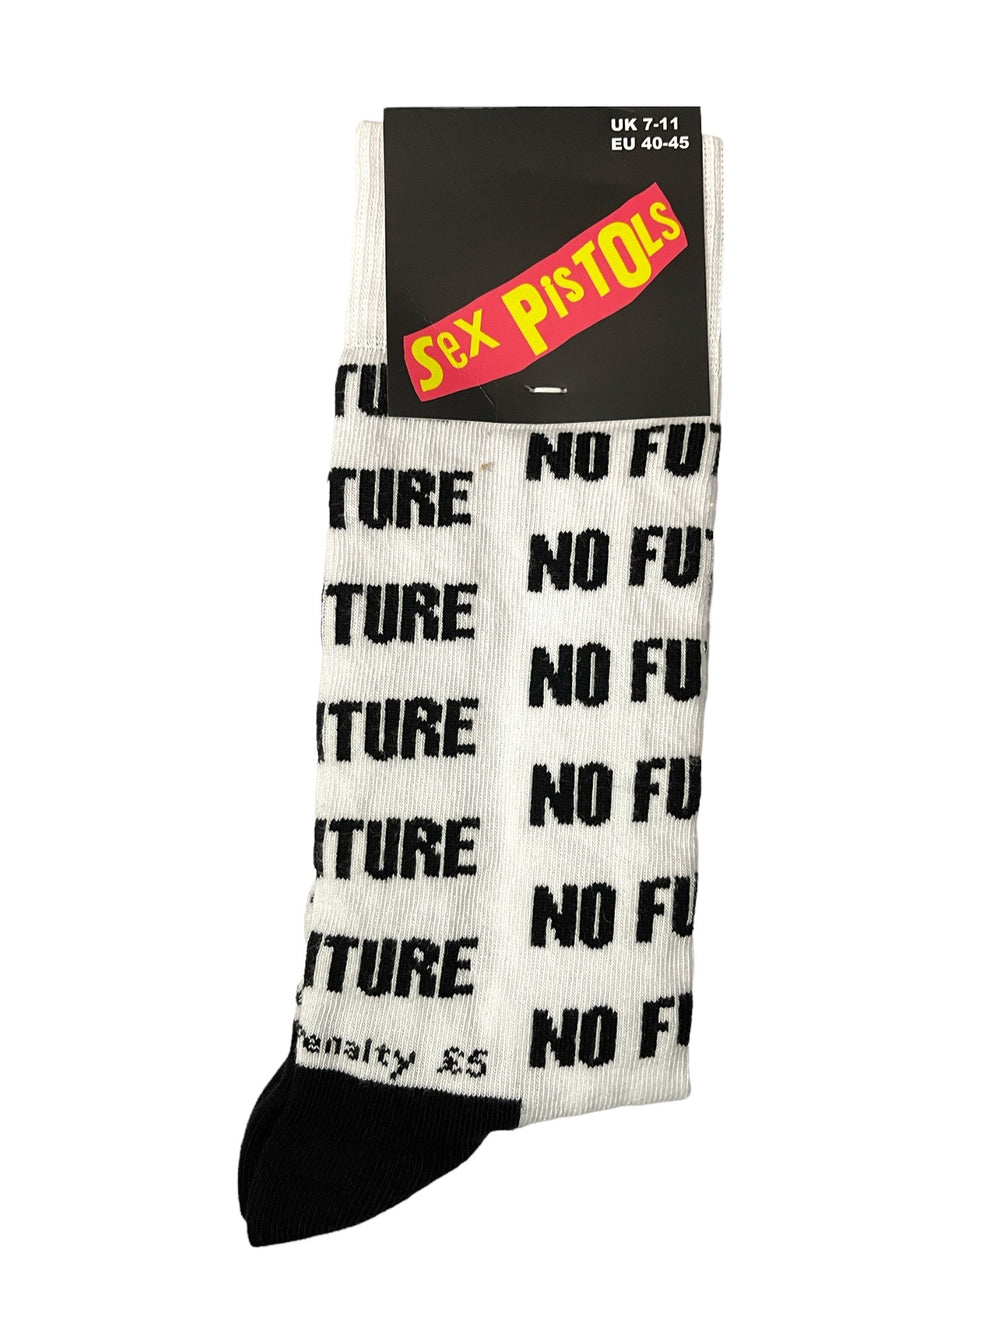 Sex Pistols No Future Official Product 1 Pair Jacquard Socks Size 7-11 UK Brand New